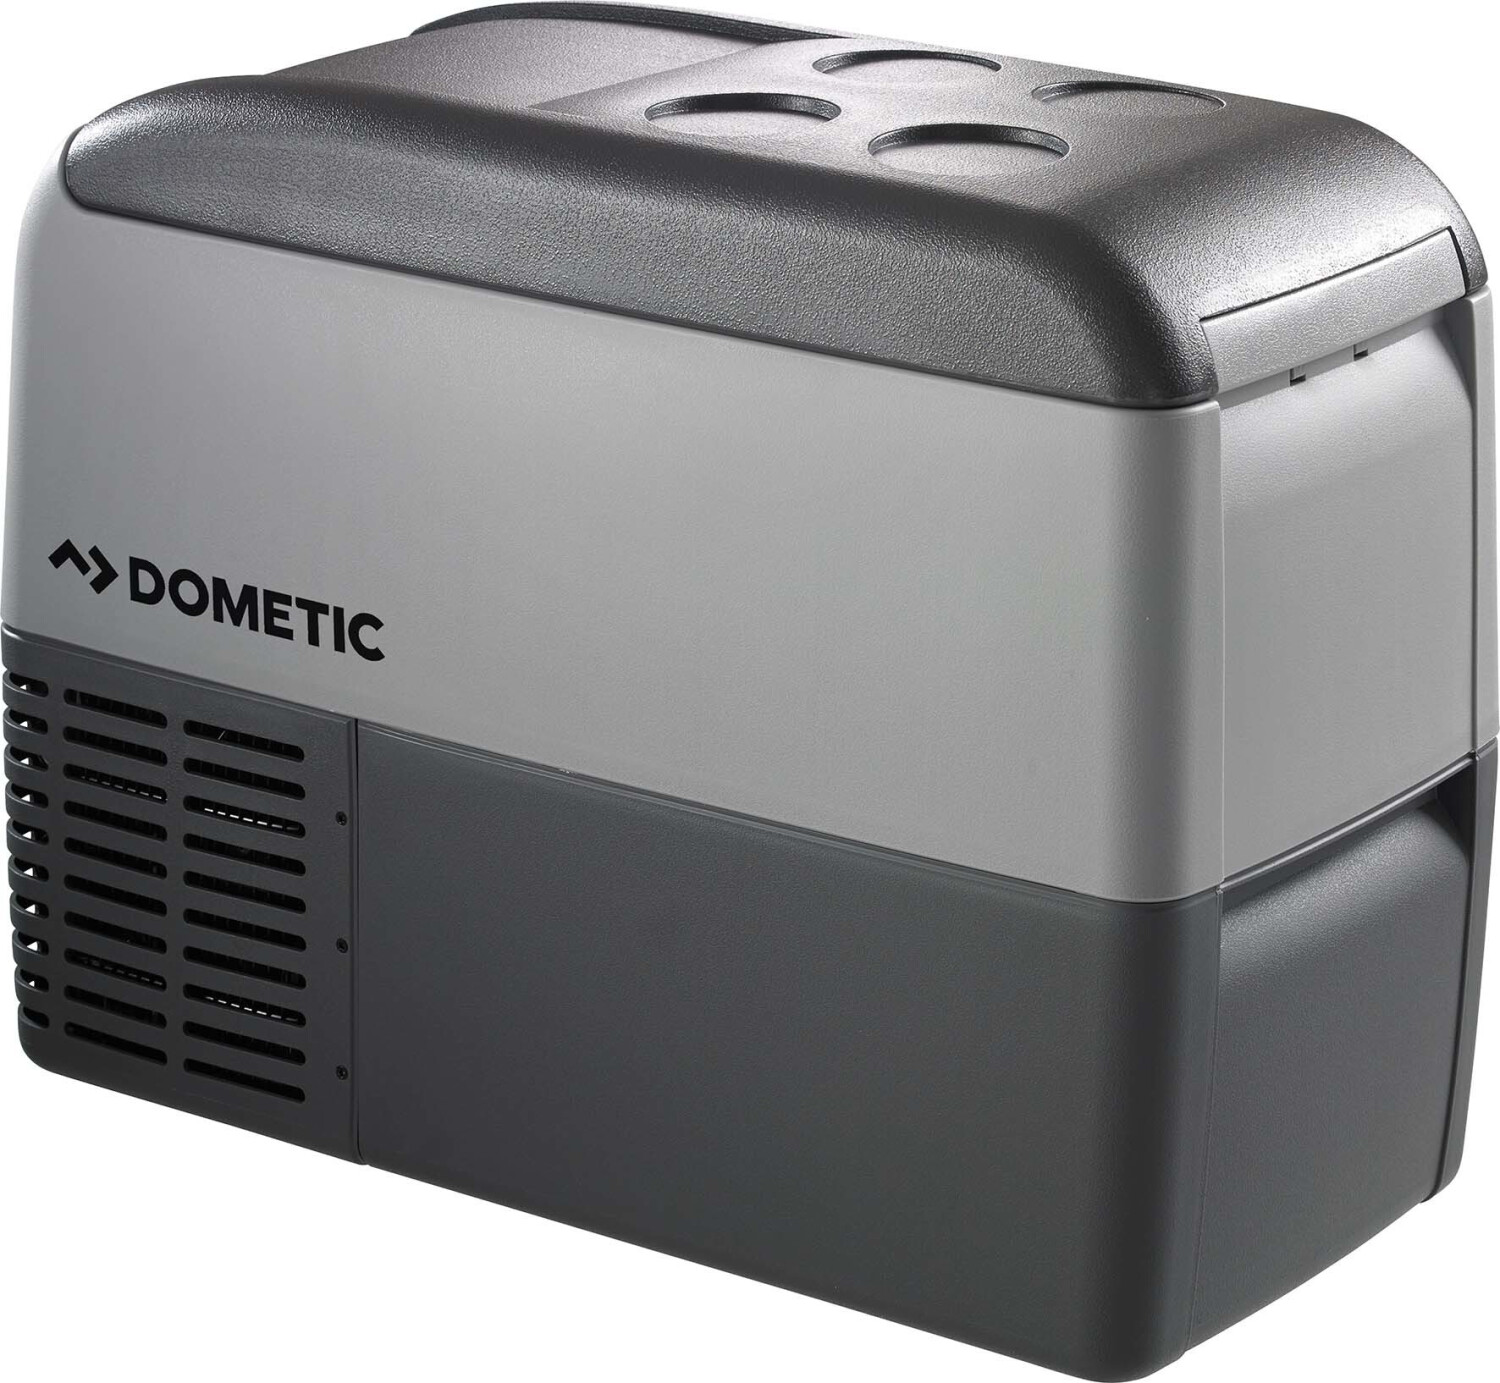 Buy Dometic CoolFreeze CDF 26 from £285.41 (Today) – Best Deals on